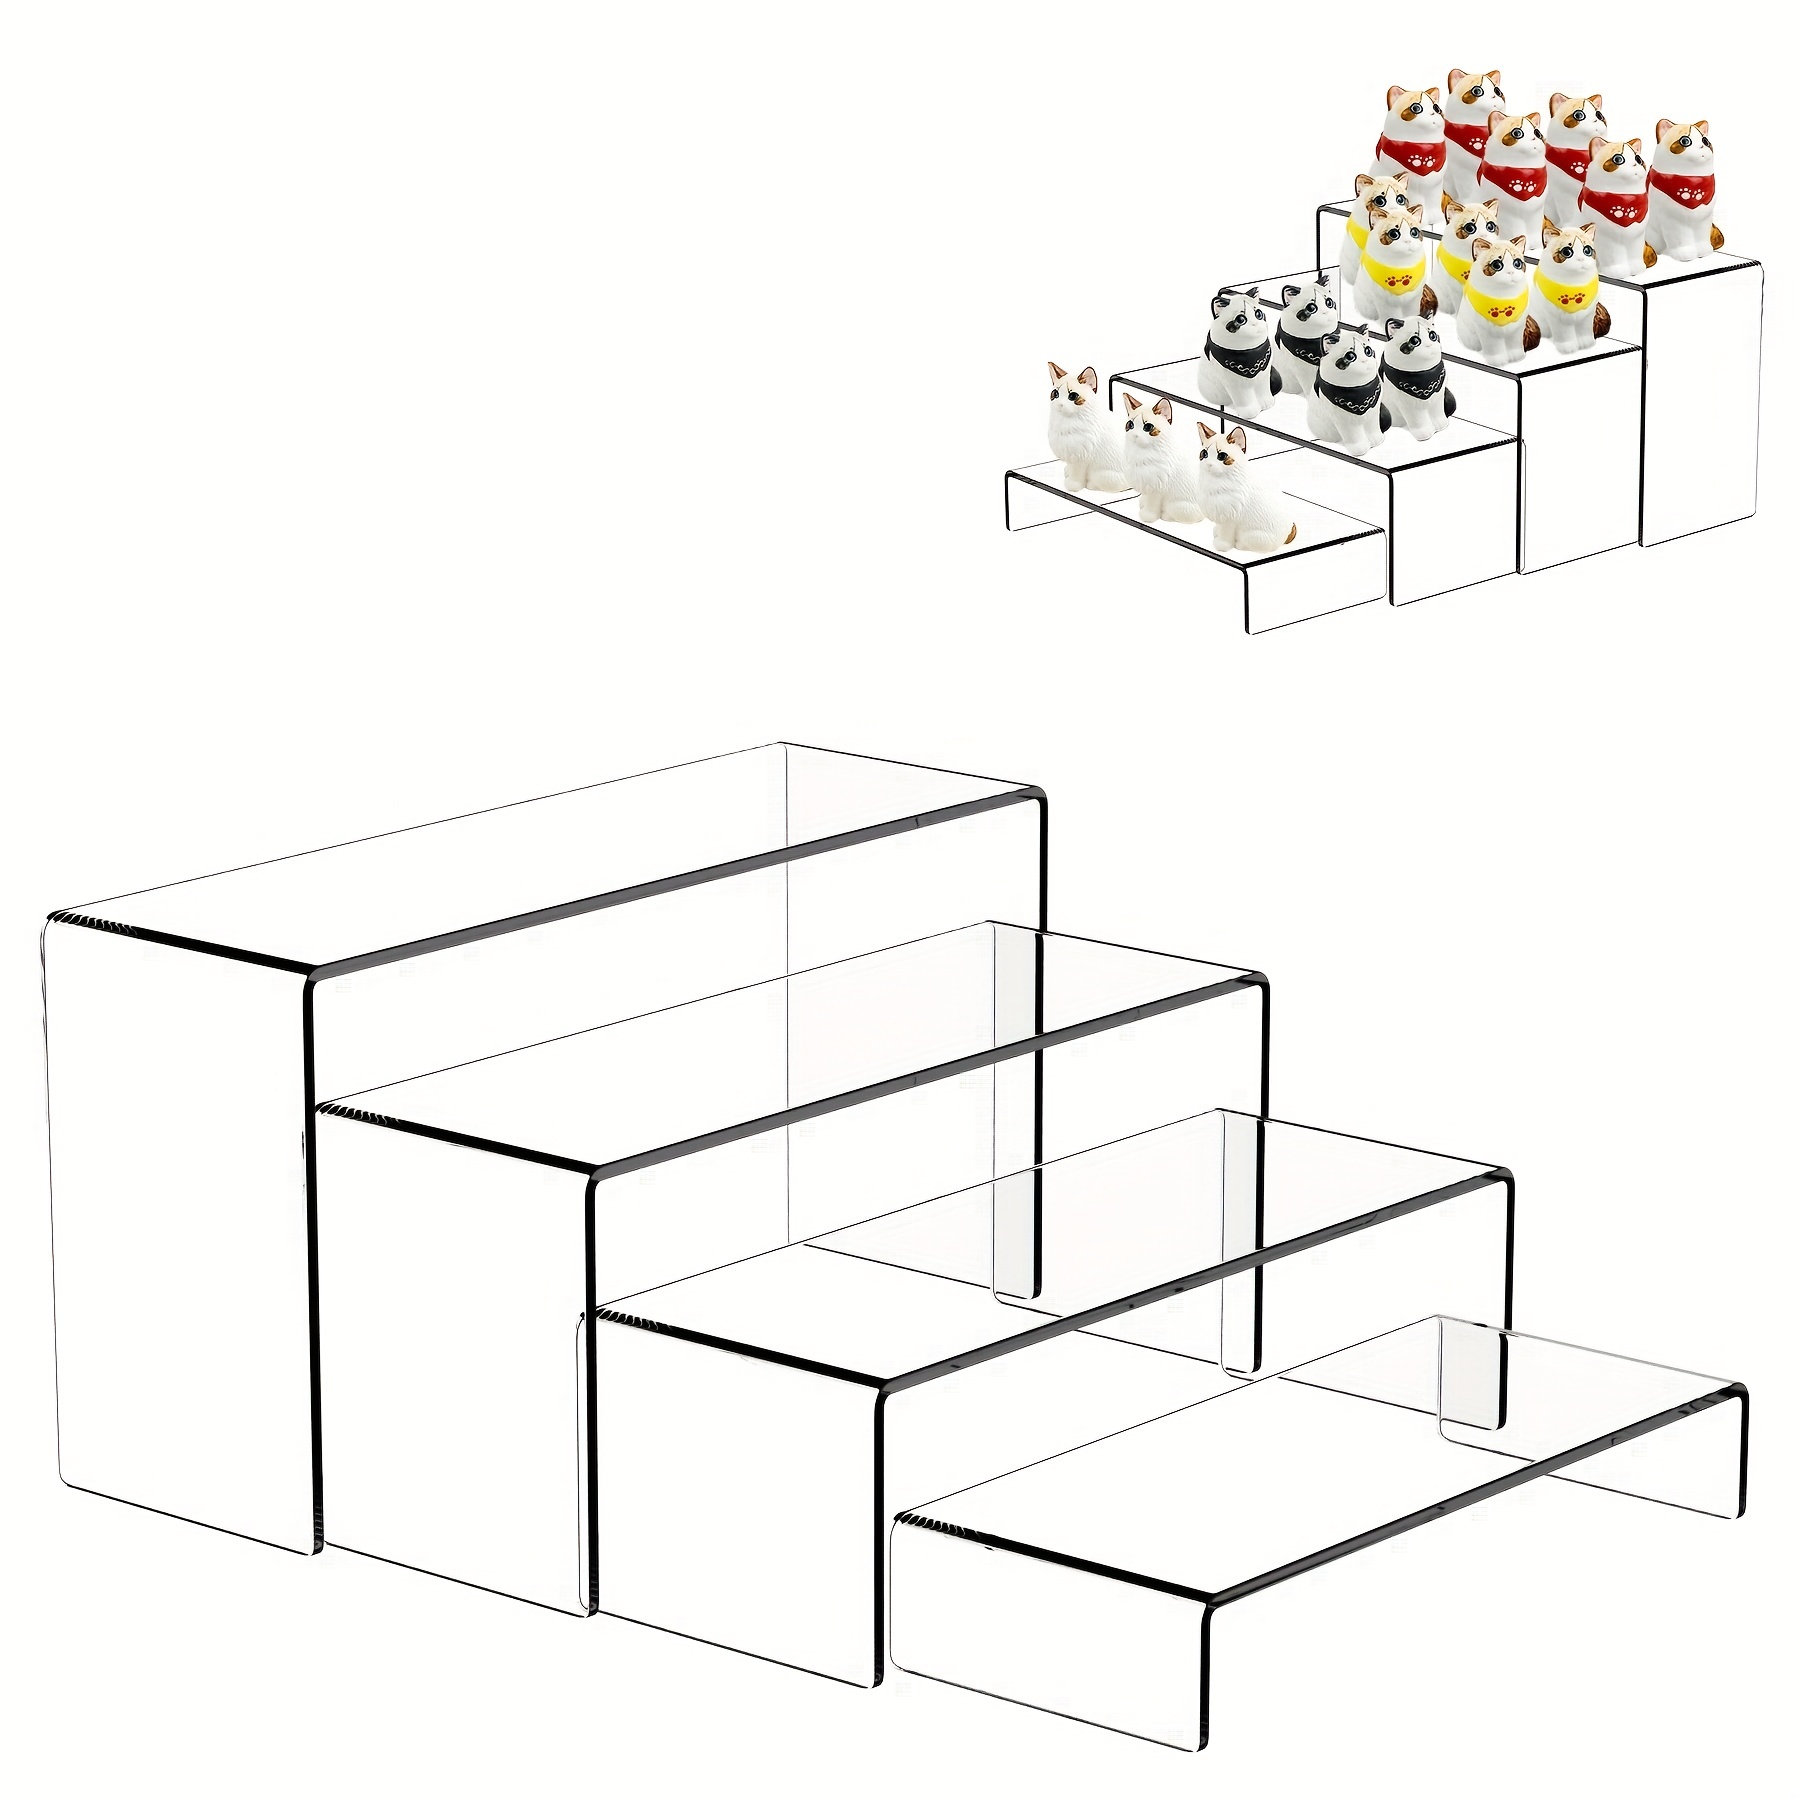 

1/2sets Acrylic Display Risers Clear Product Stand,cupcakes Holder Dessert Display Transparent Showcase Stands, Candy Bar Risers, Acrylic Lifts Display For Figures